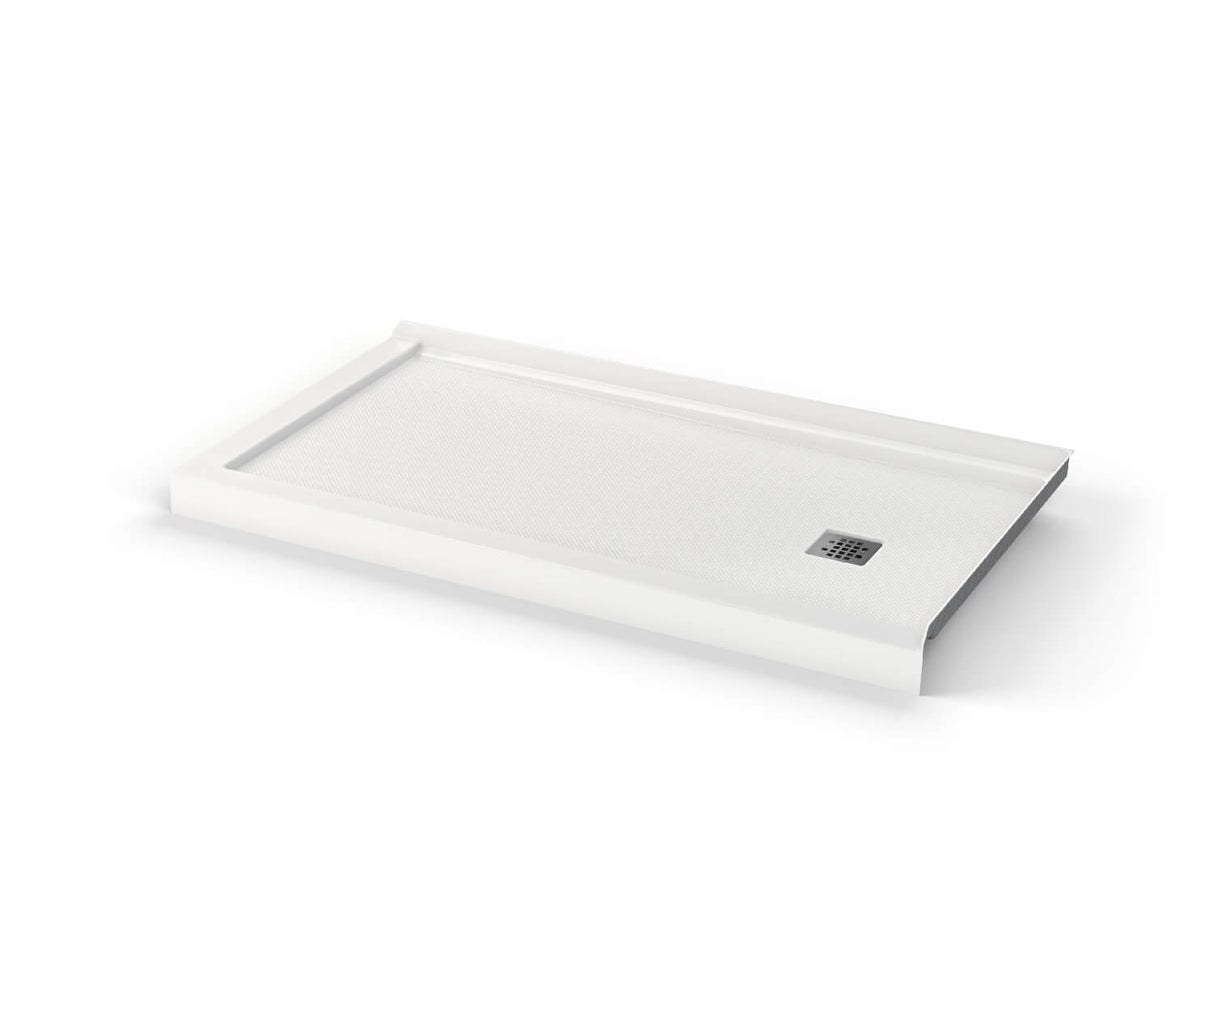 MAAX 420035-543-001-101 B3Square 6034 Acrylic Corner Right Shower Base in White with Anti-slip Bottom with Center Drain